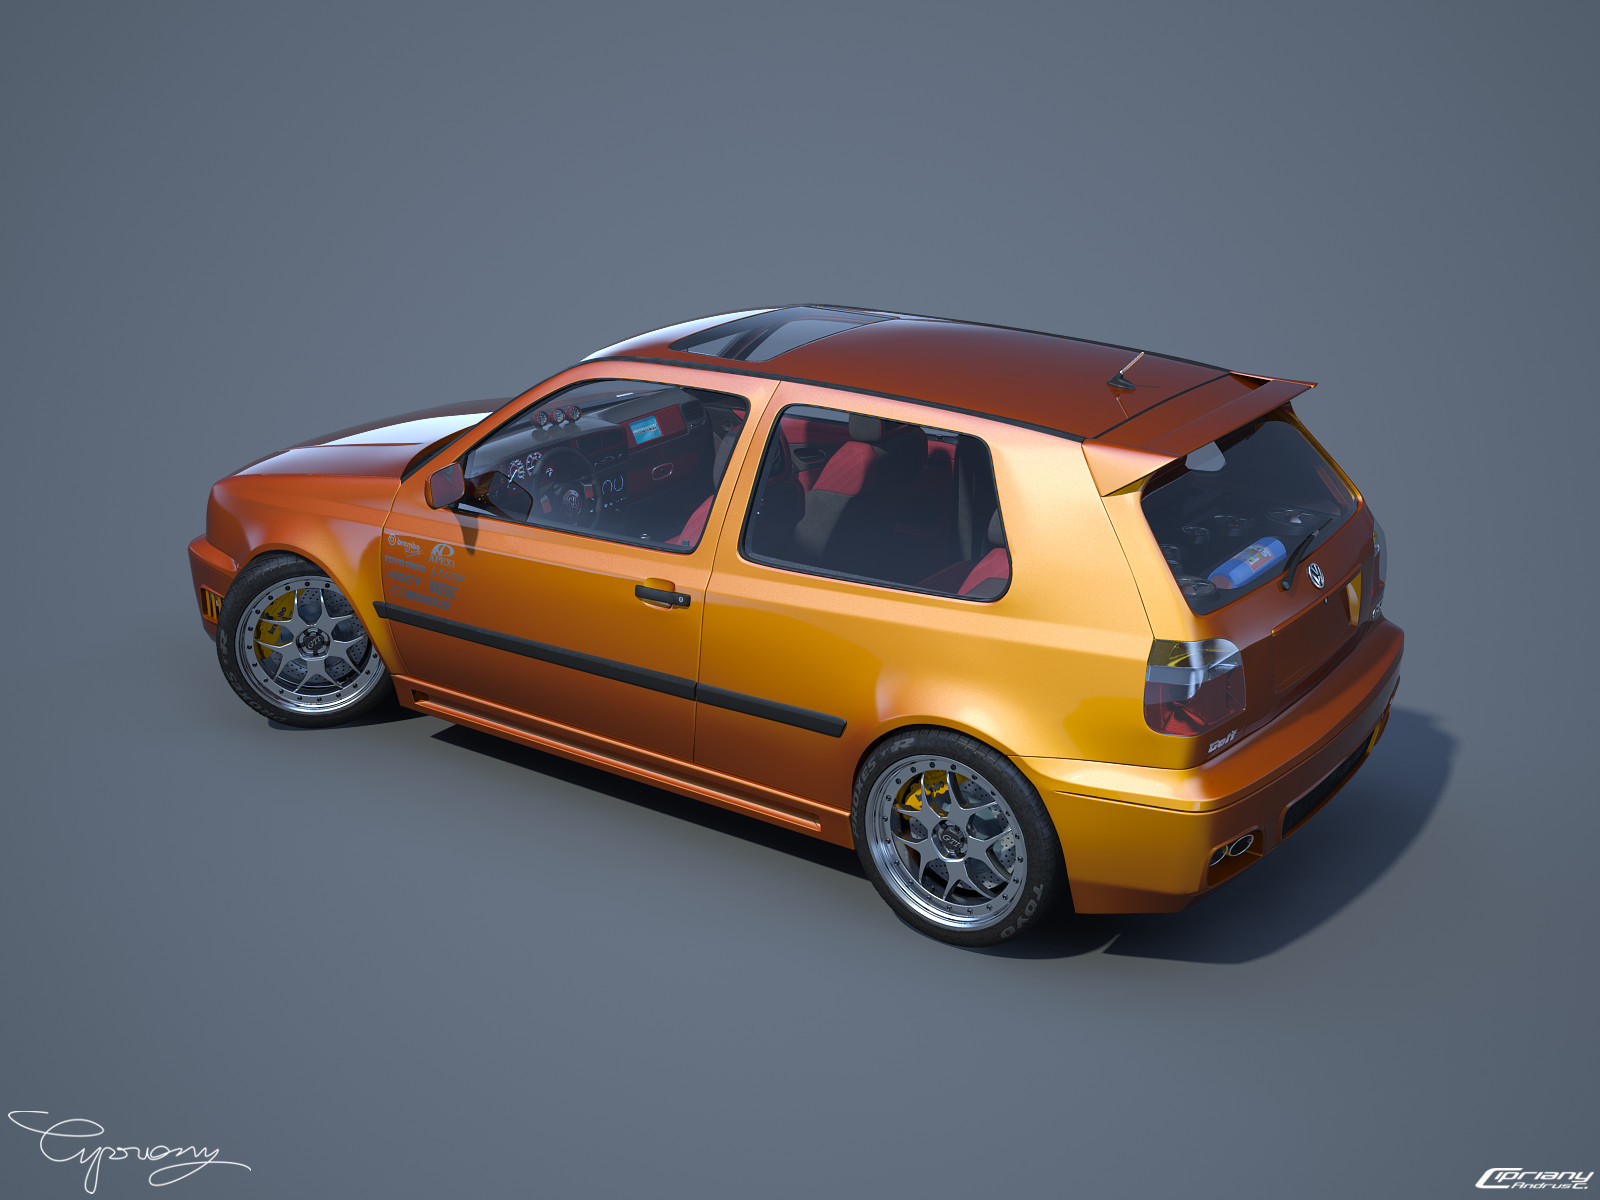 VW Golf 3 GTI 14 by cipriany